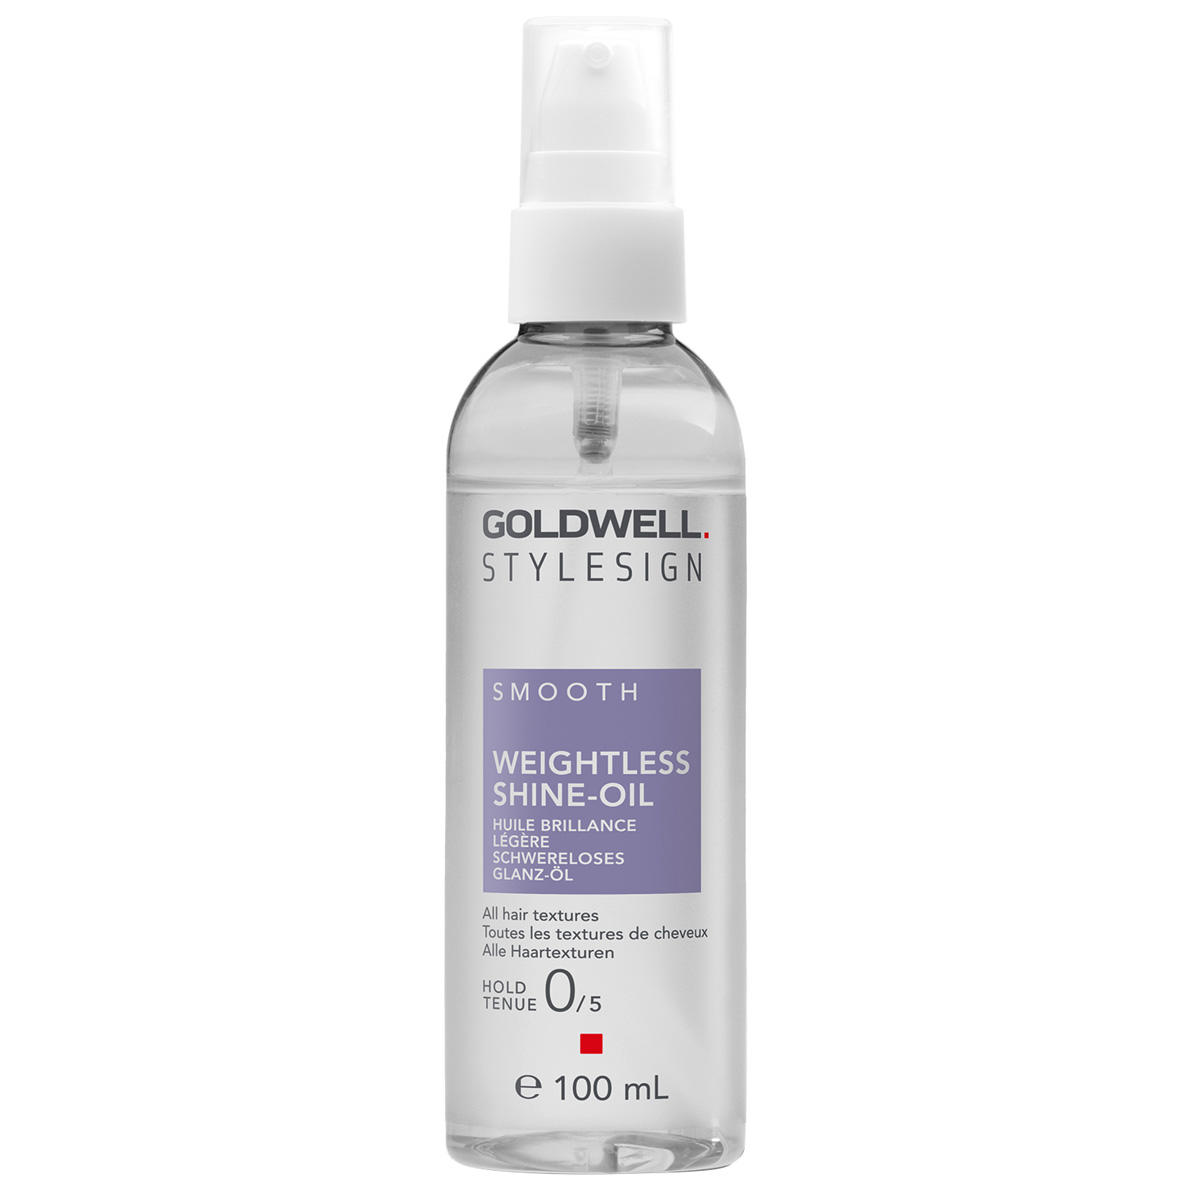 Goldwell StyleSign Smooth Weightless gloss oil  - 1